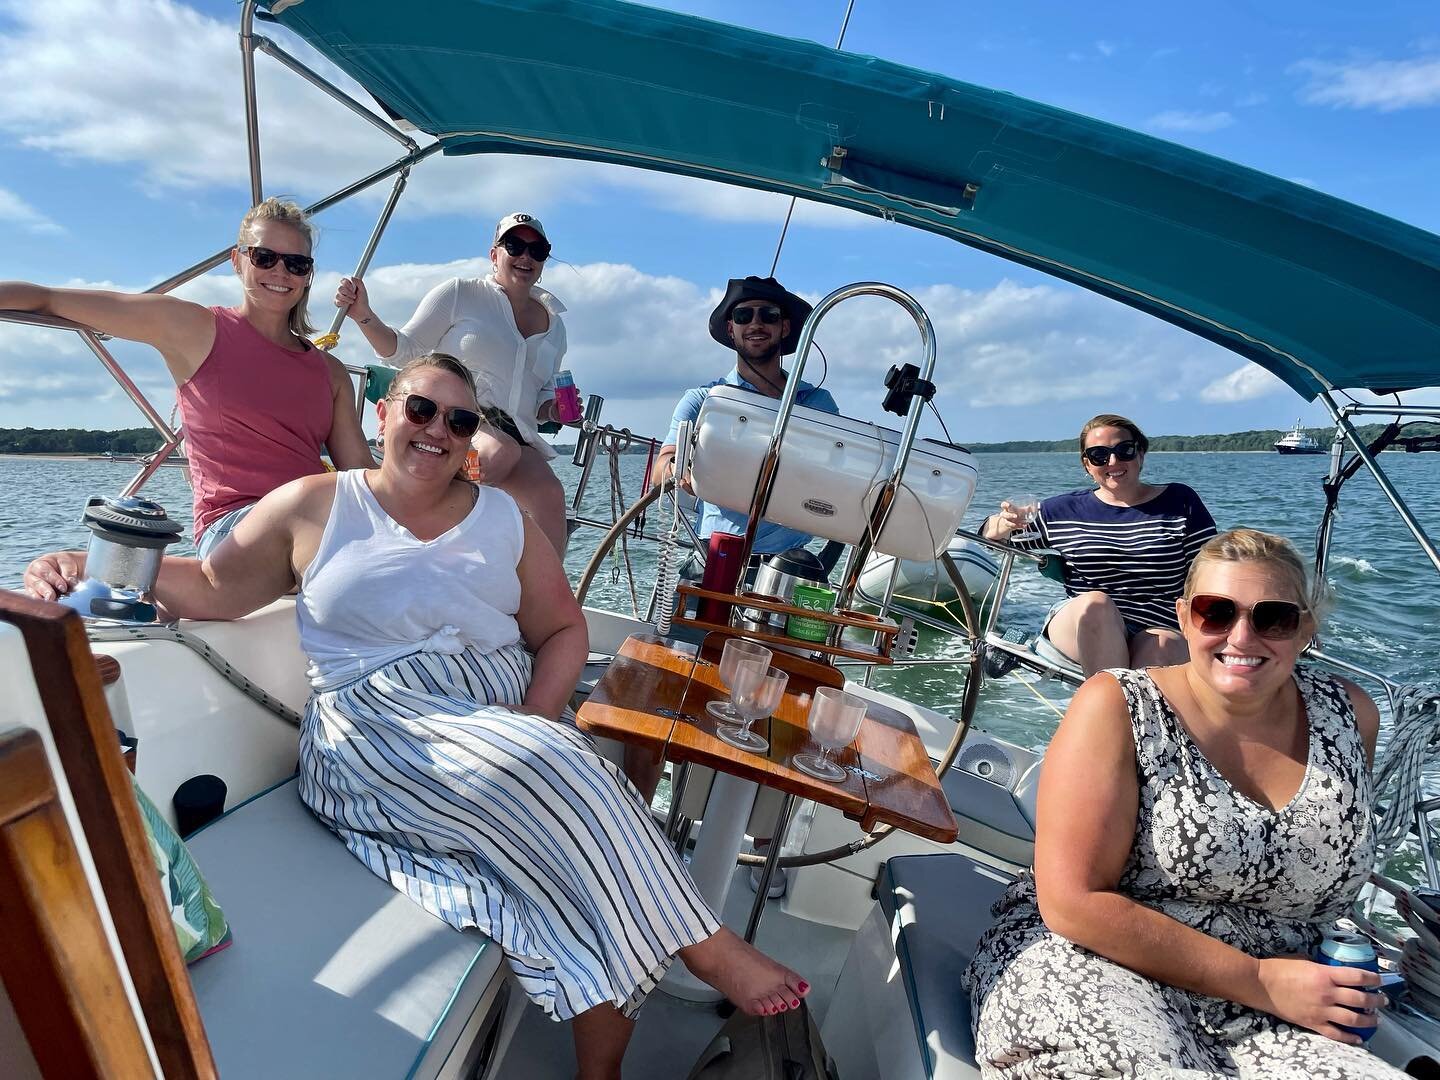 A fabulous sail with some fabulous ladies ✨